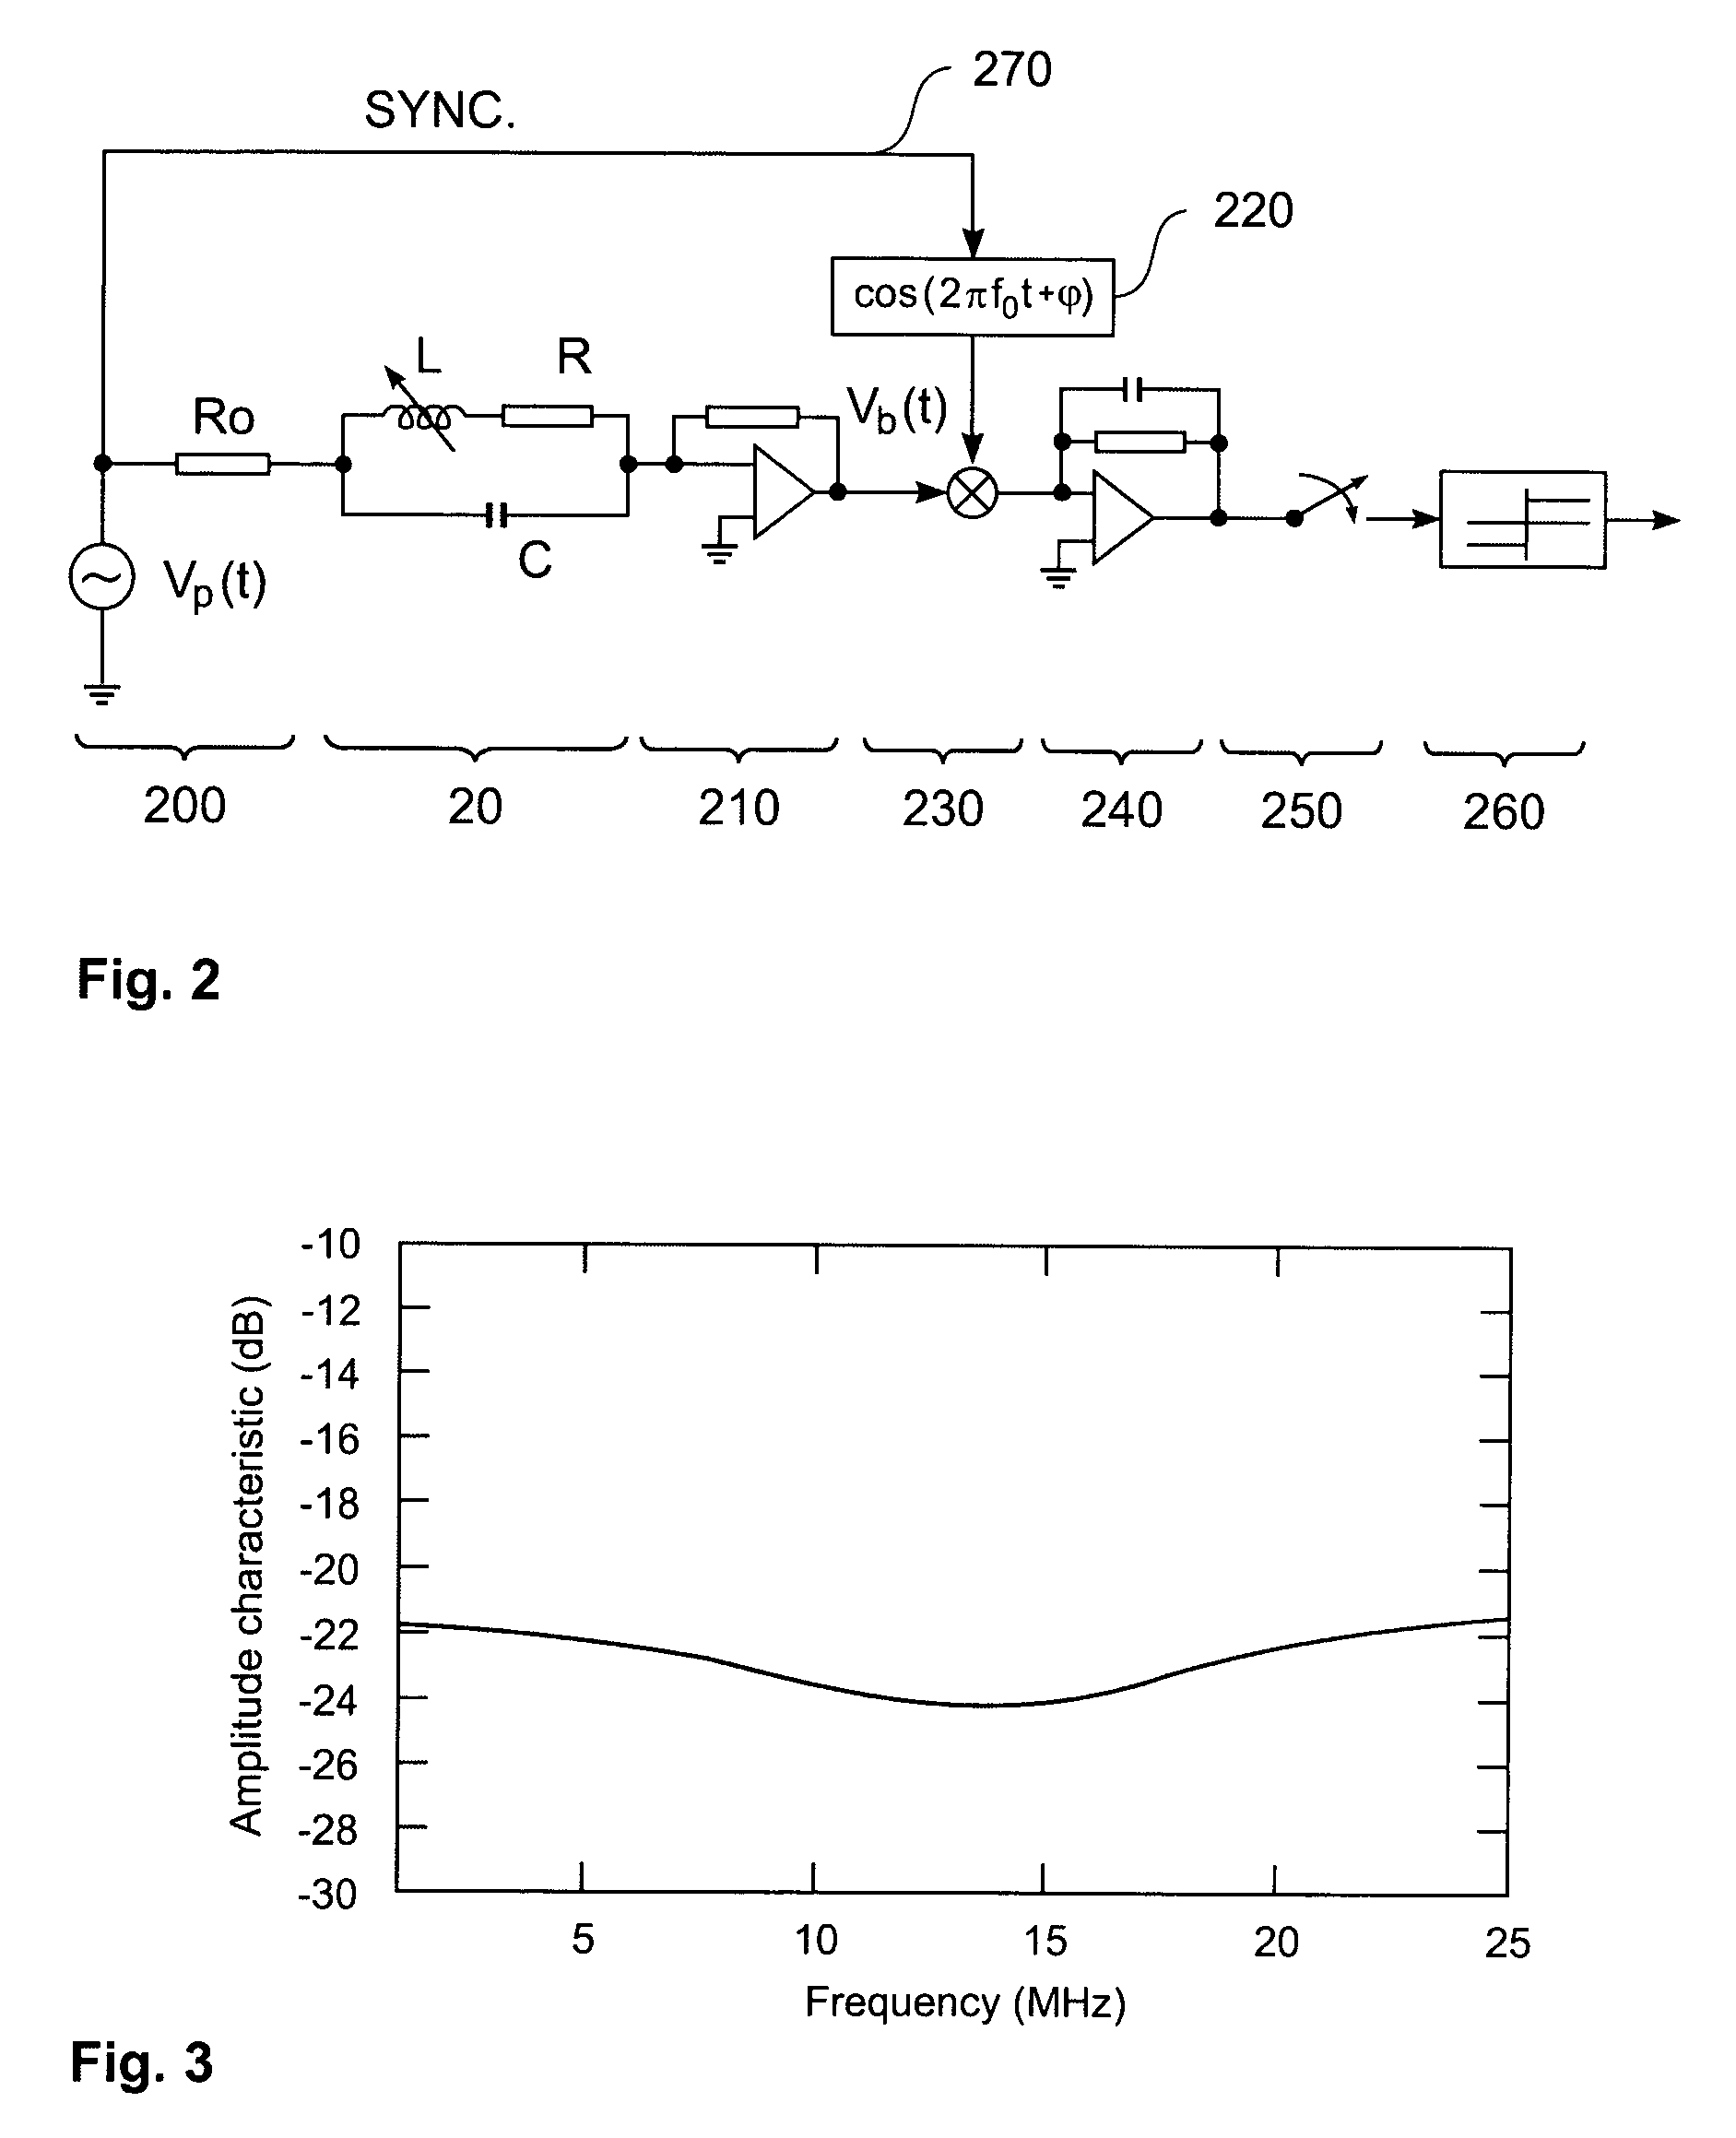 Reading data in probe-based storage devices